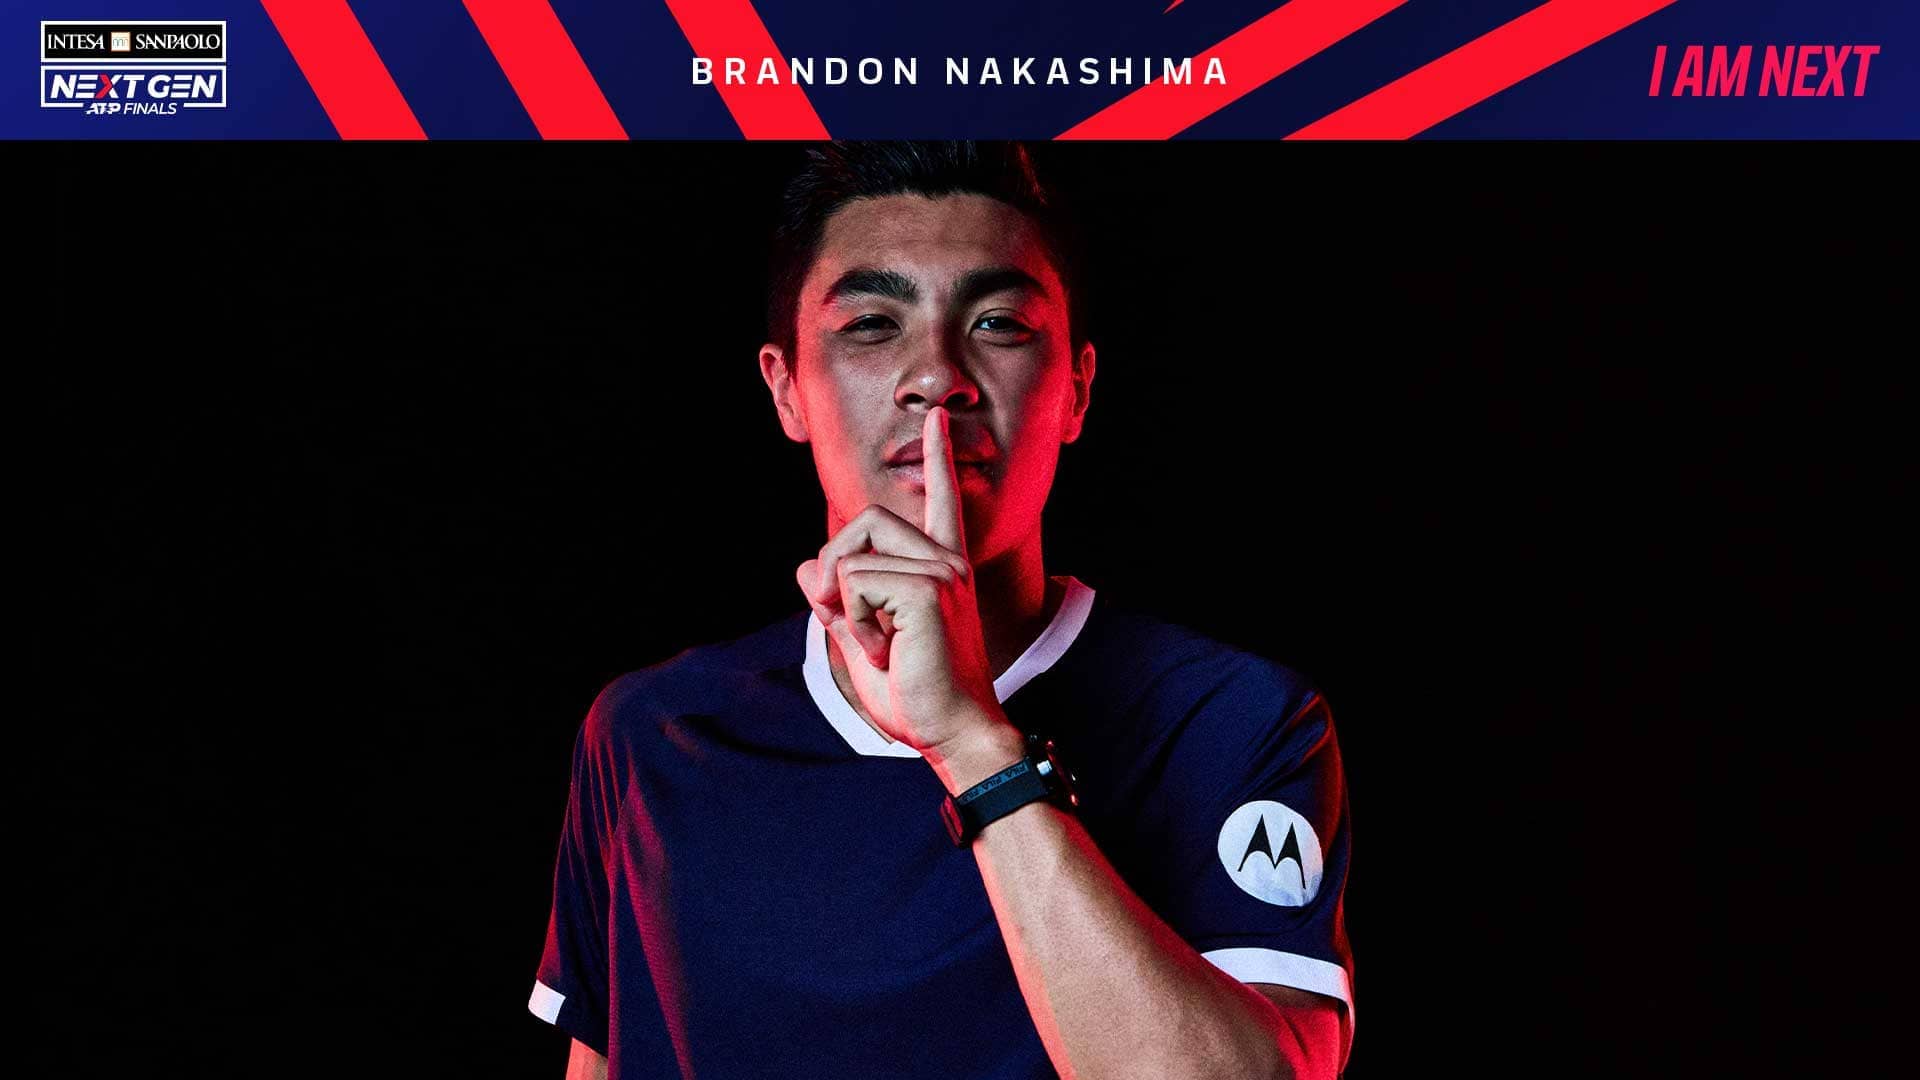 Brandon Nakashima is making his second appearance in Milan.